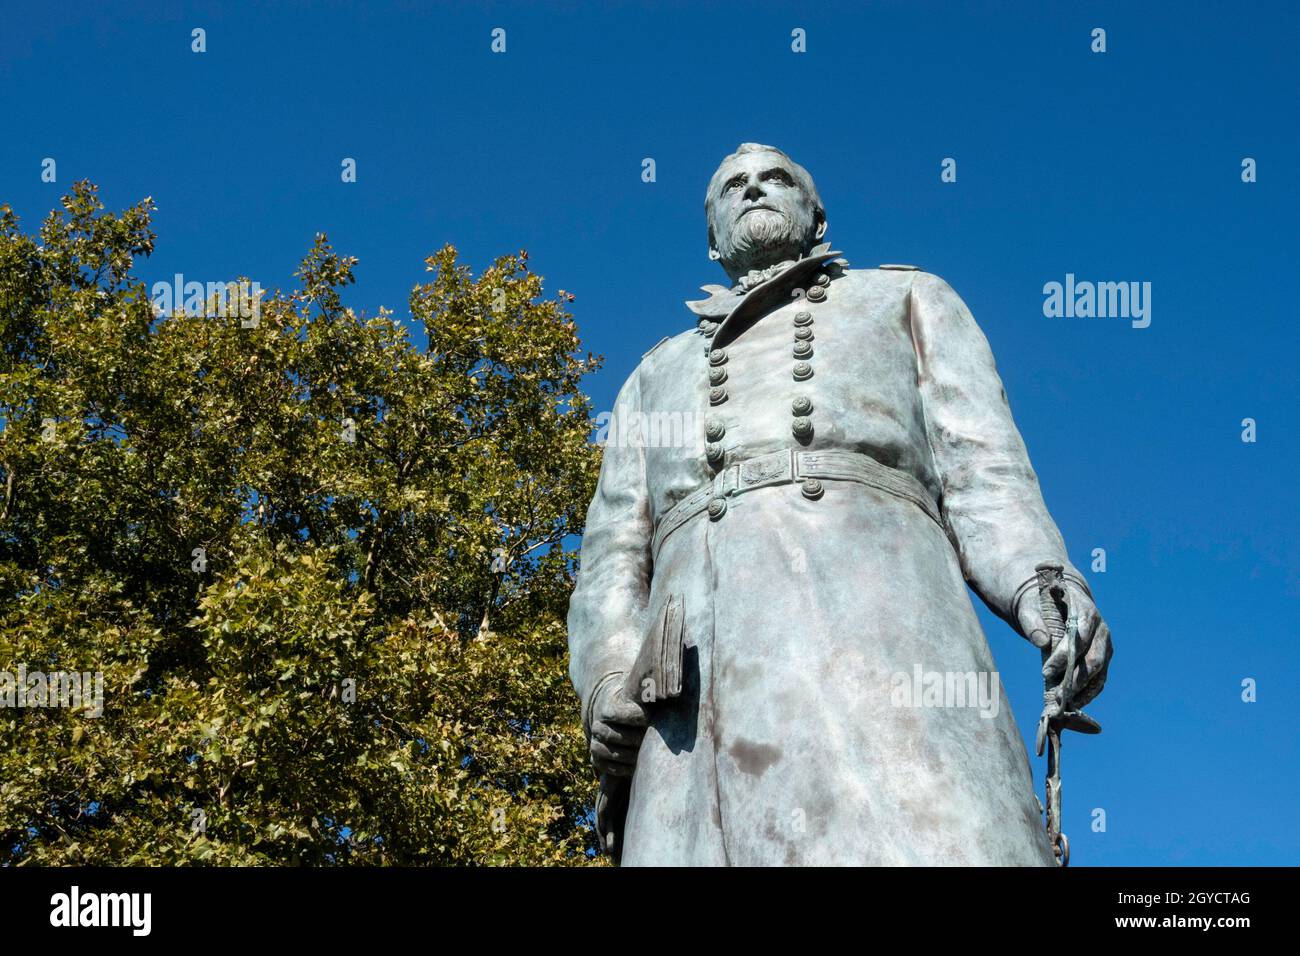 General Ulysses S. Grant Monument Statue at the U.S. Military Academy, West Point, NY, USA Stock Photo